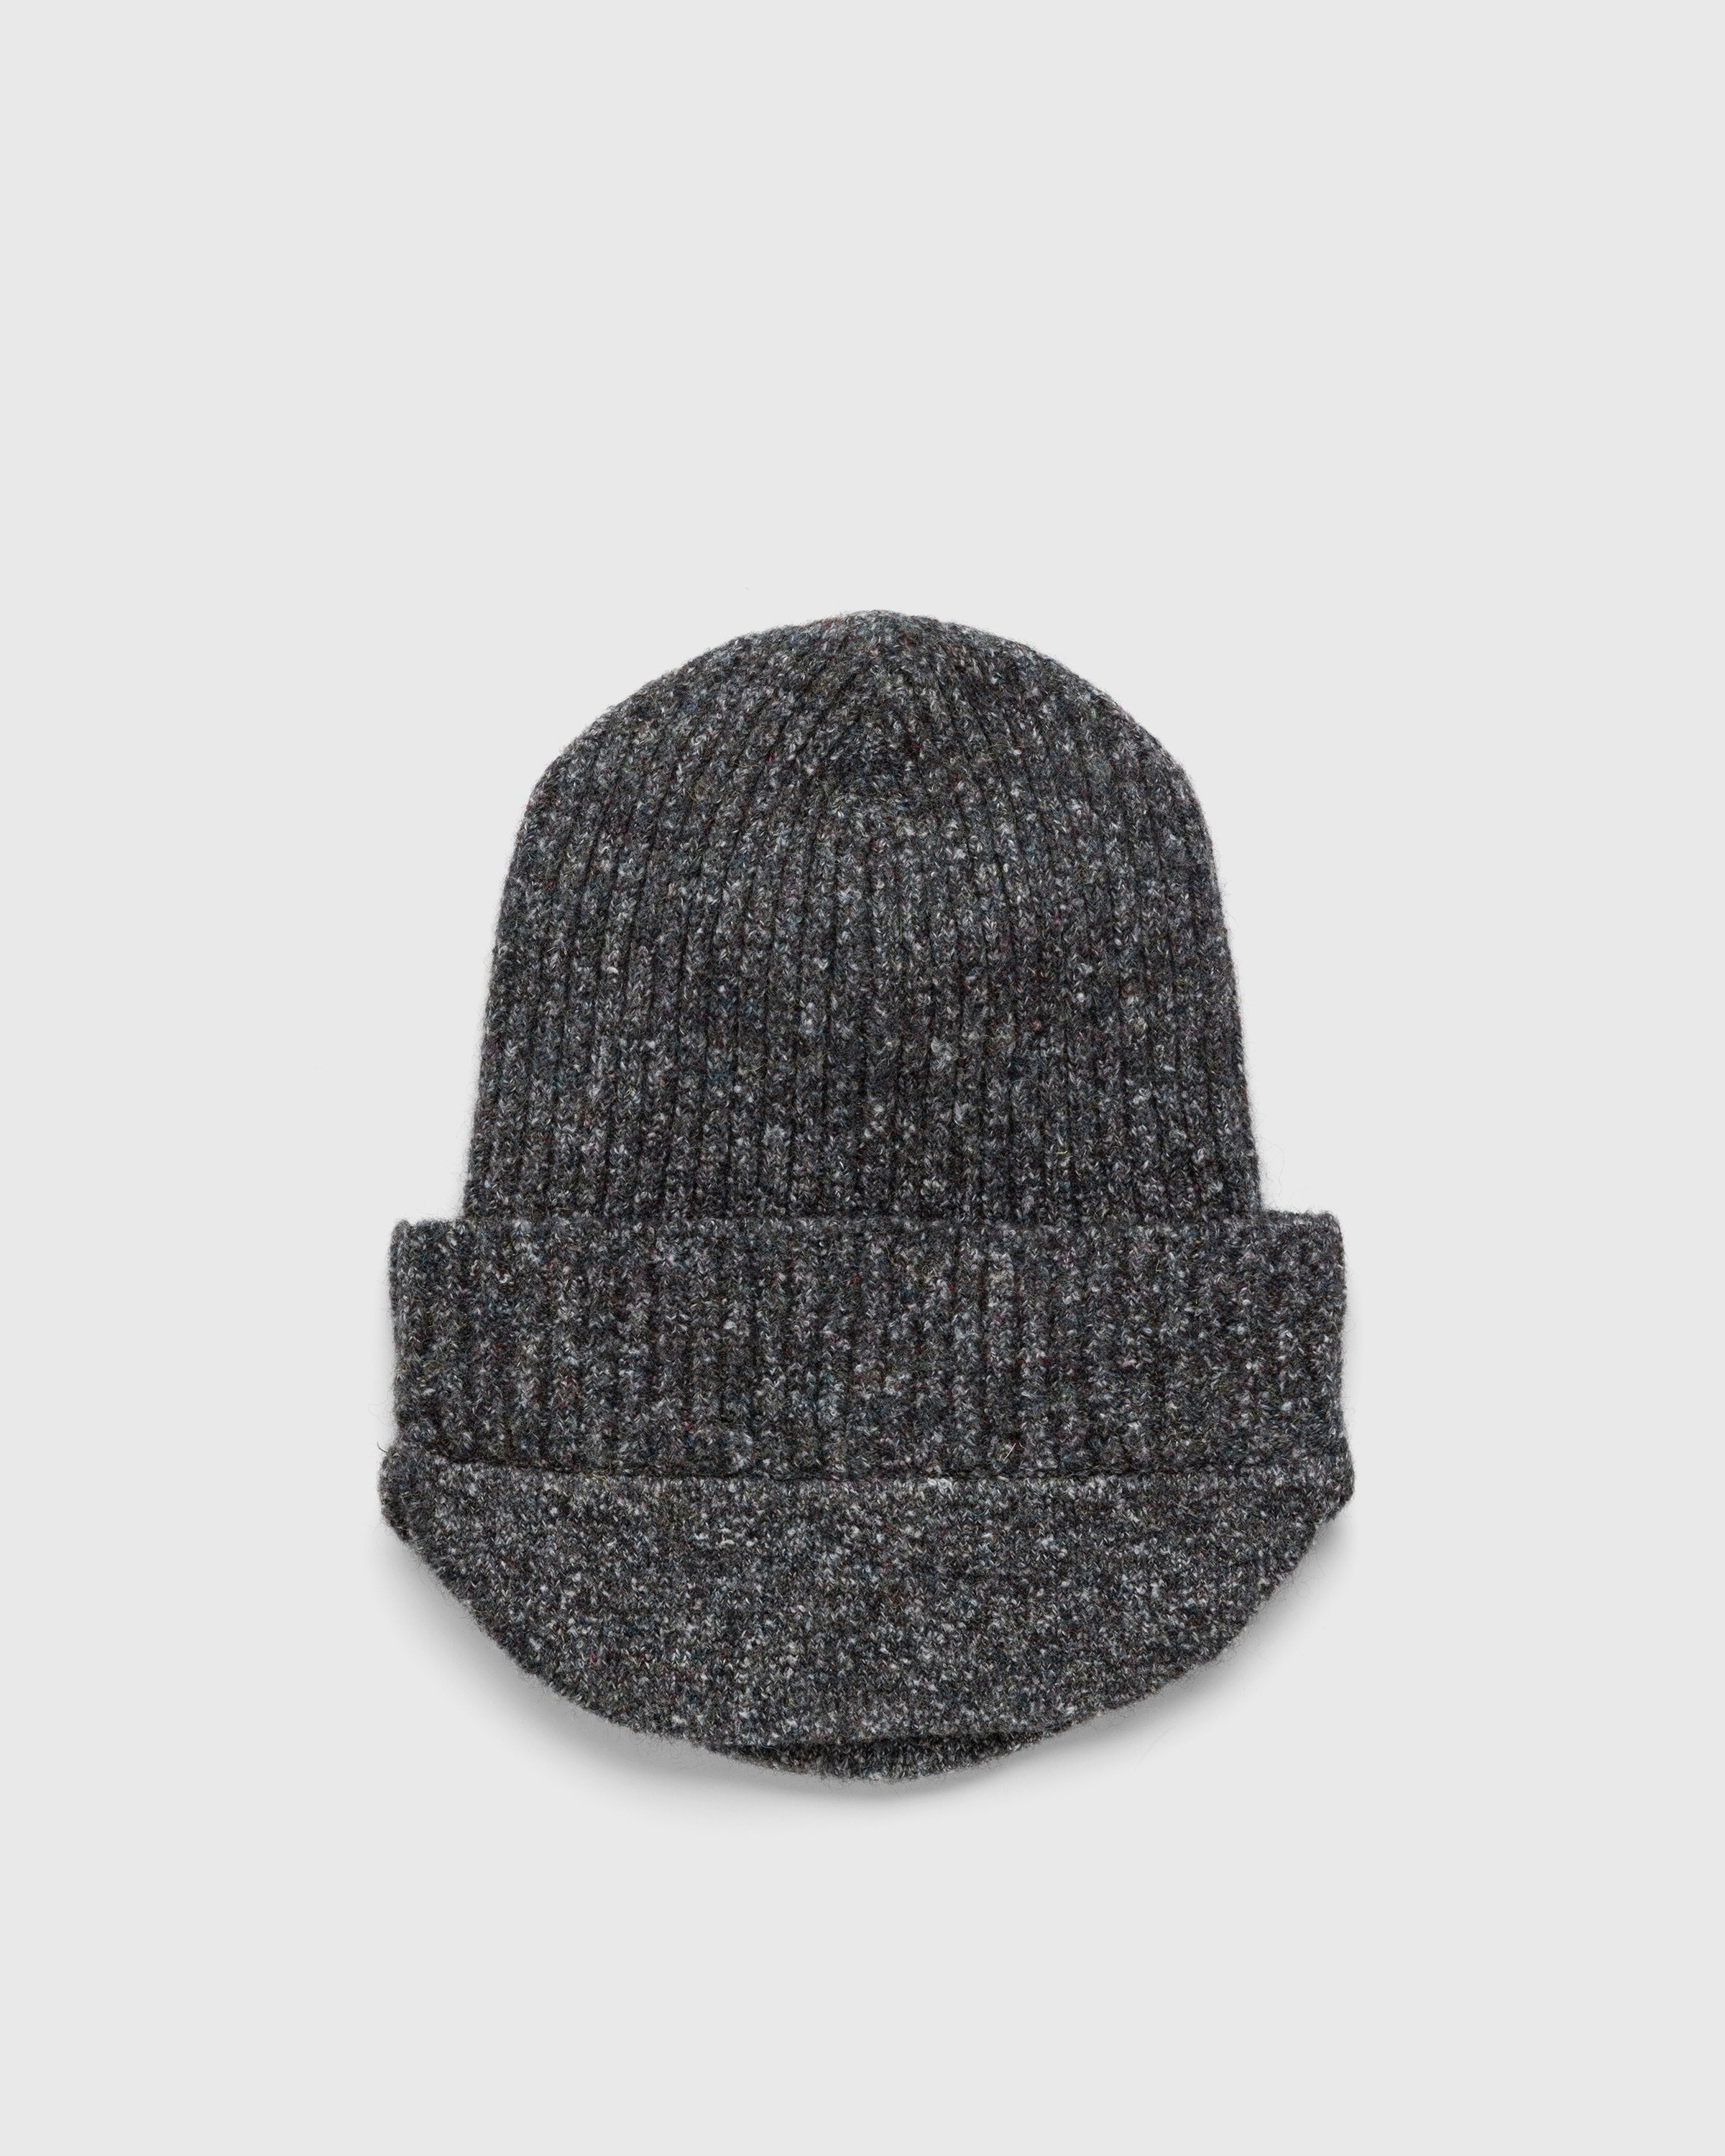 RANRA – Der Beanie Frosted Charcoal - Beanies - Grey - Image 2